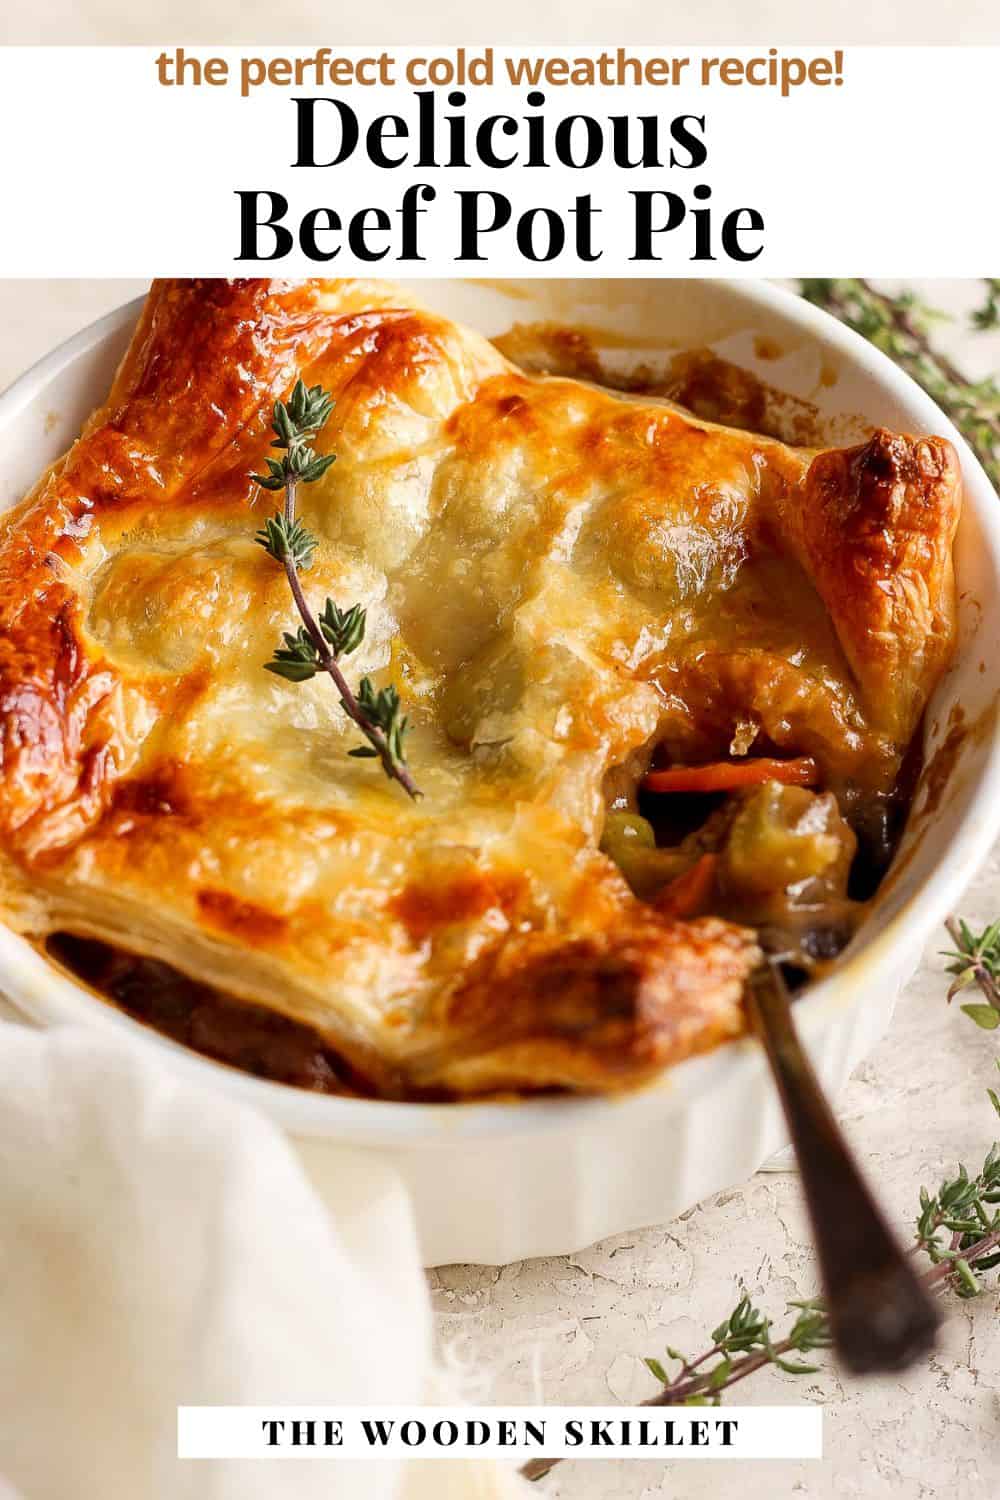 Pinterest image showing a cooked beef pot pie with the title "the perfect cold weather recipe! Delicious pot pie."